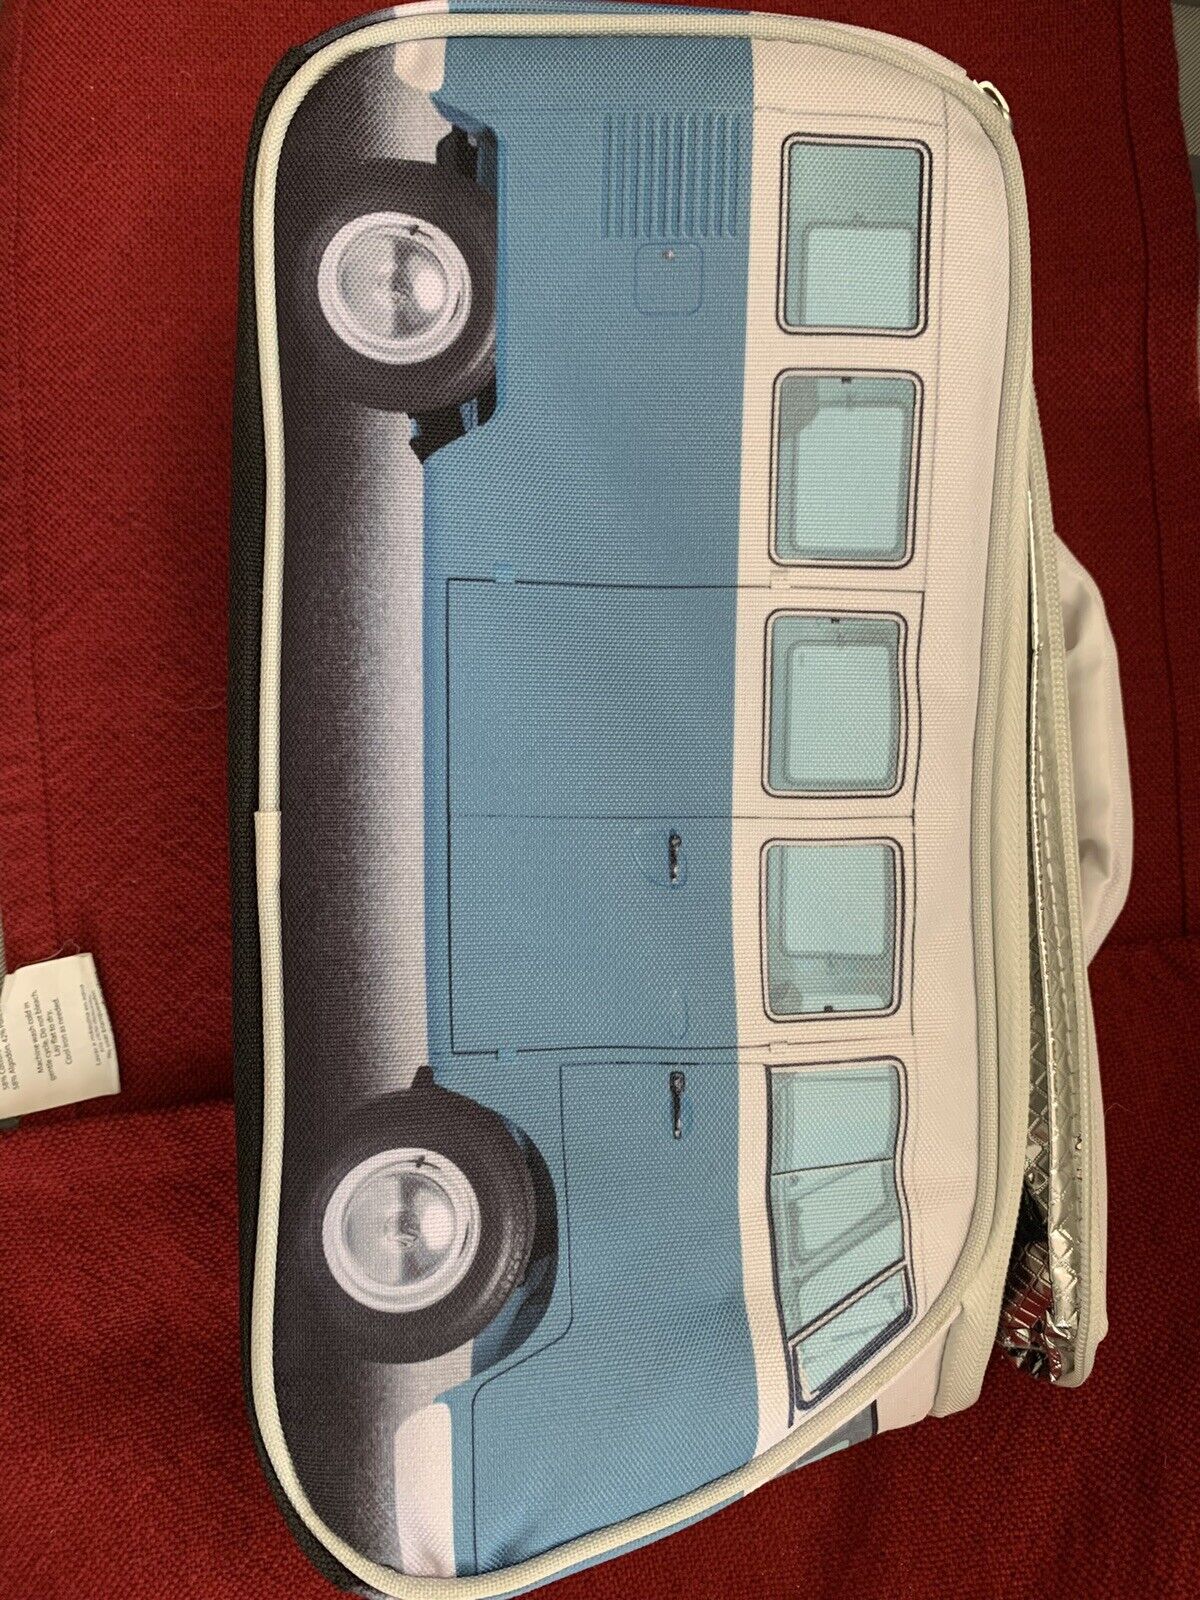 Volkswagen Bus Lunchbox Officially Licensed - Very Clean